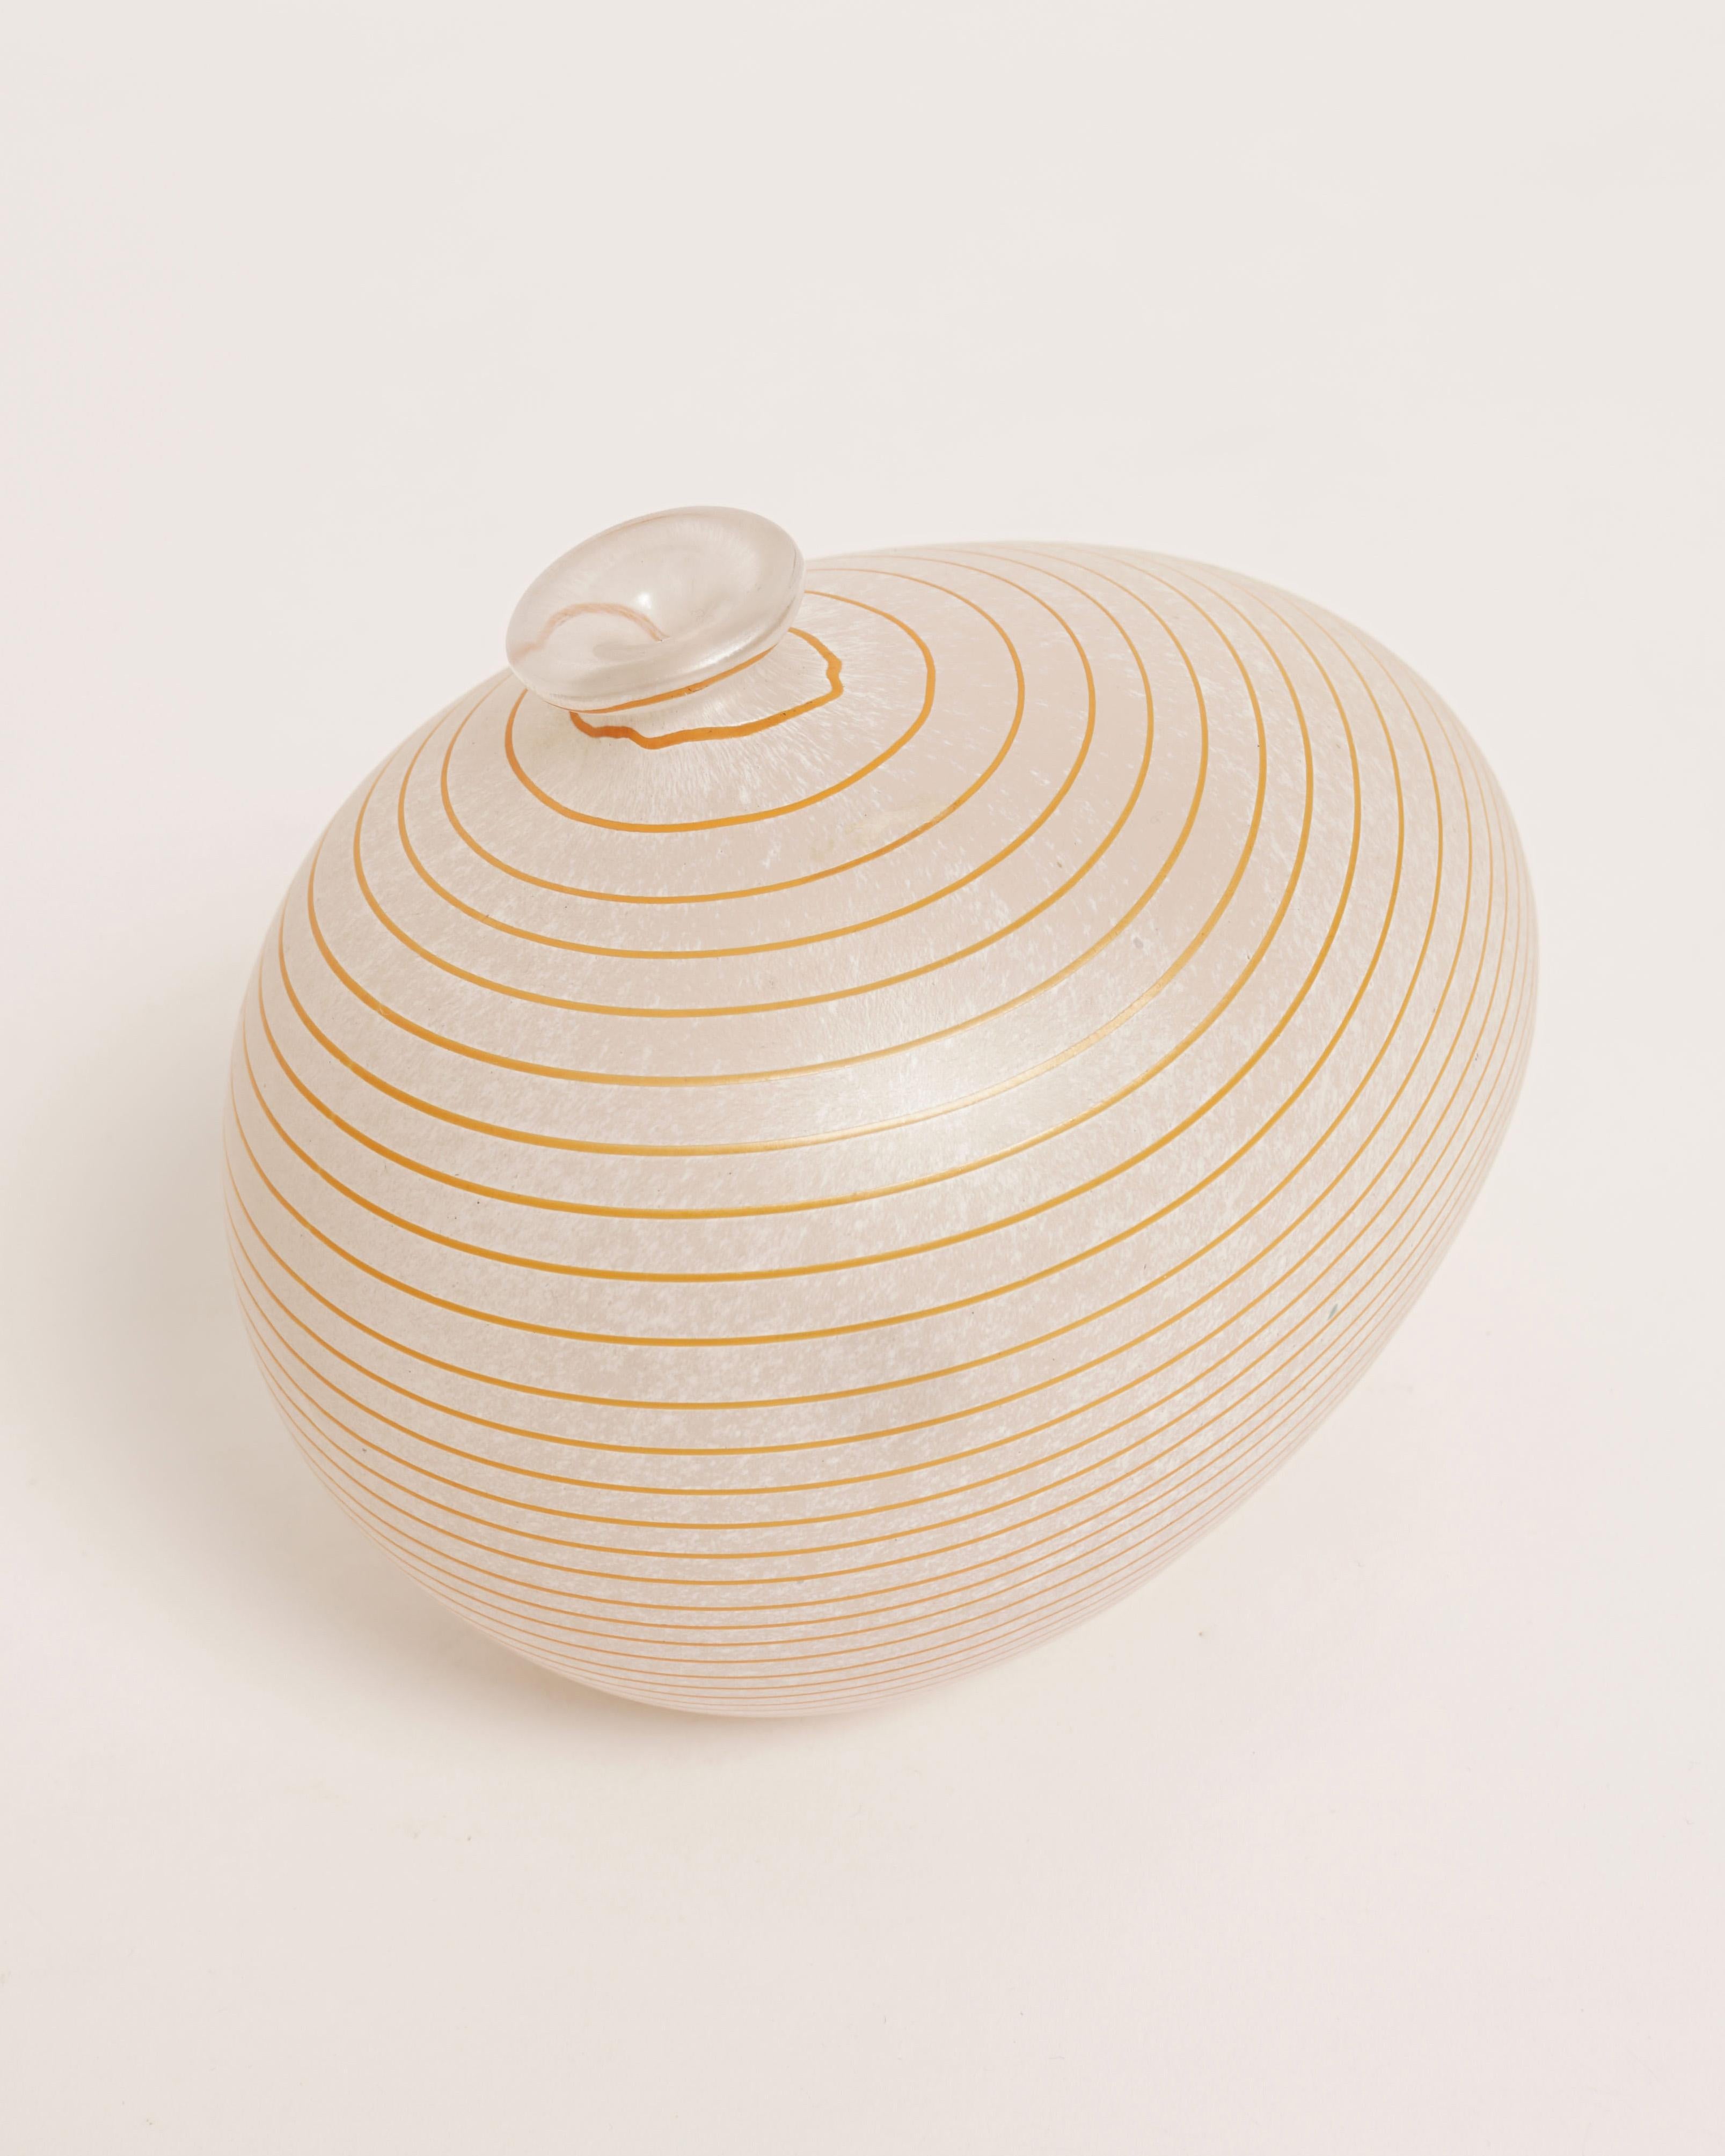 Kosta Boda
 'Soliflore' Vase, c. 1970
Execution: Blown glass, cream and orange.
Signed: Boda and numbered. (picture 4)
H : 14 cm (5.5